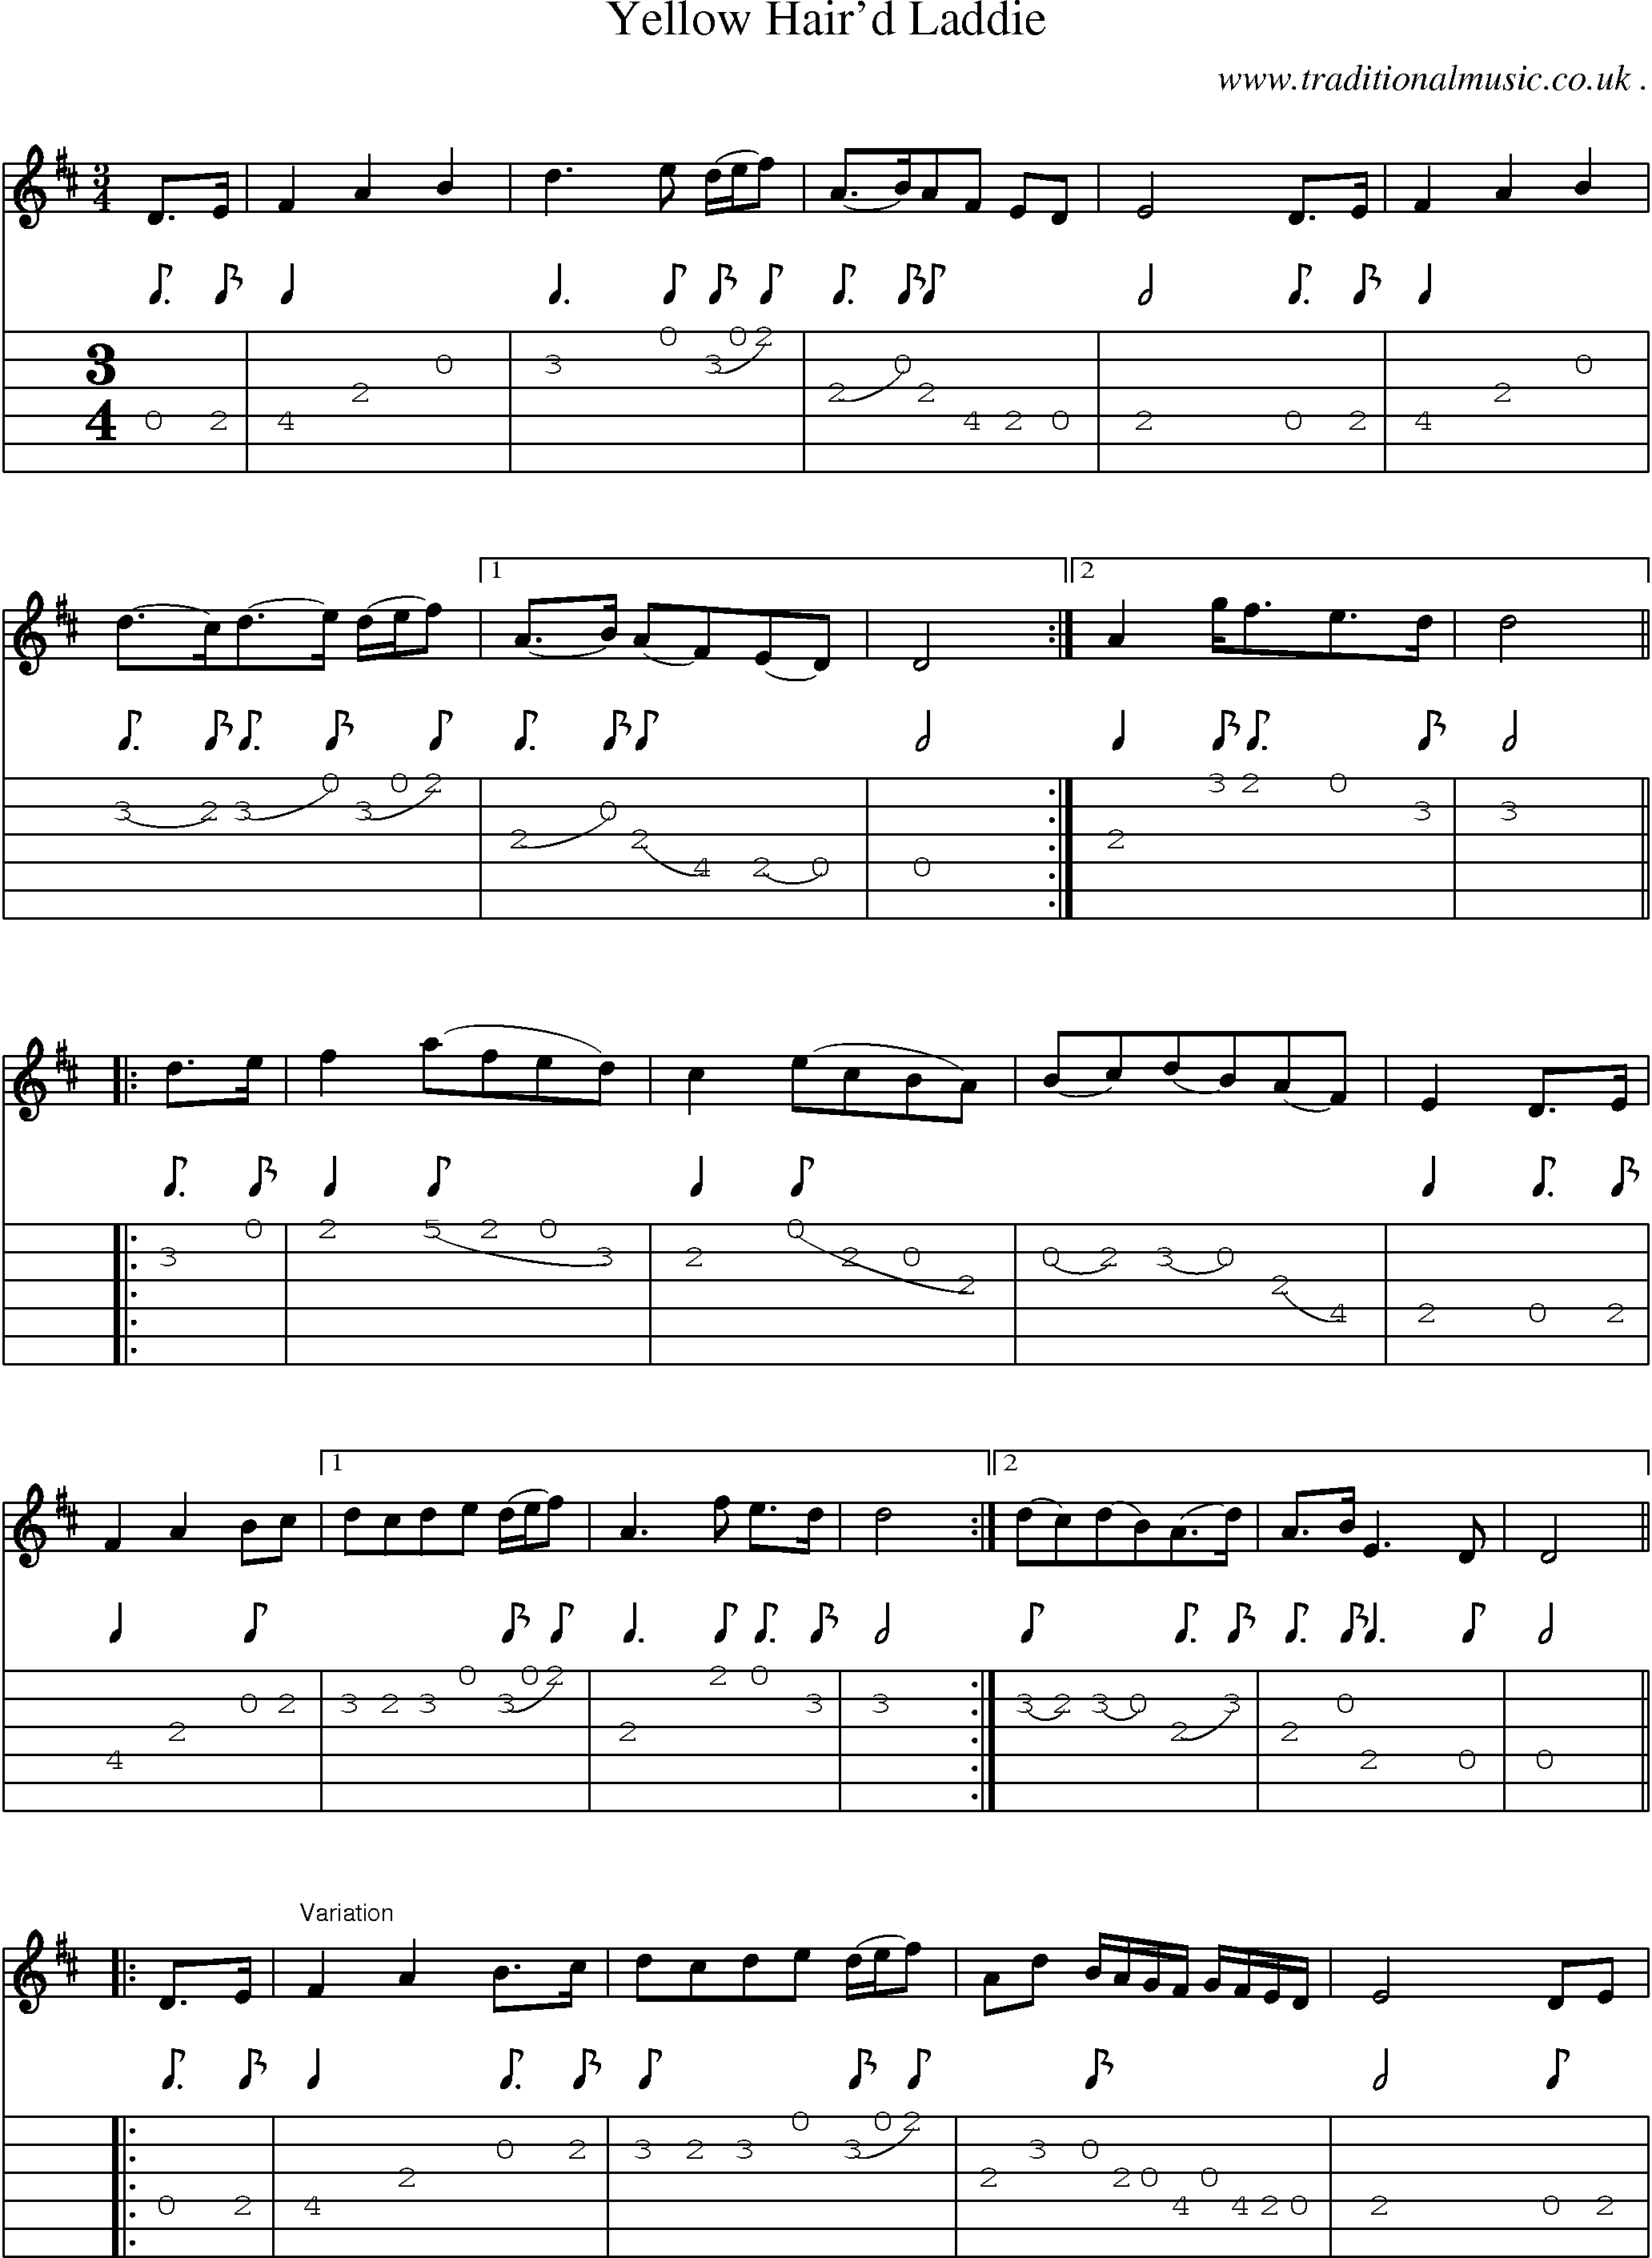 Sheet-Music and Guitar Tabs for Yellow Haird Laddie